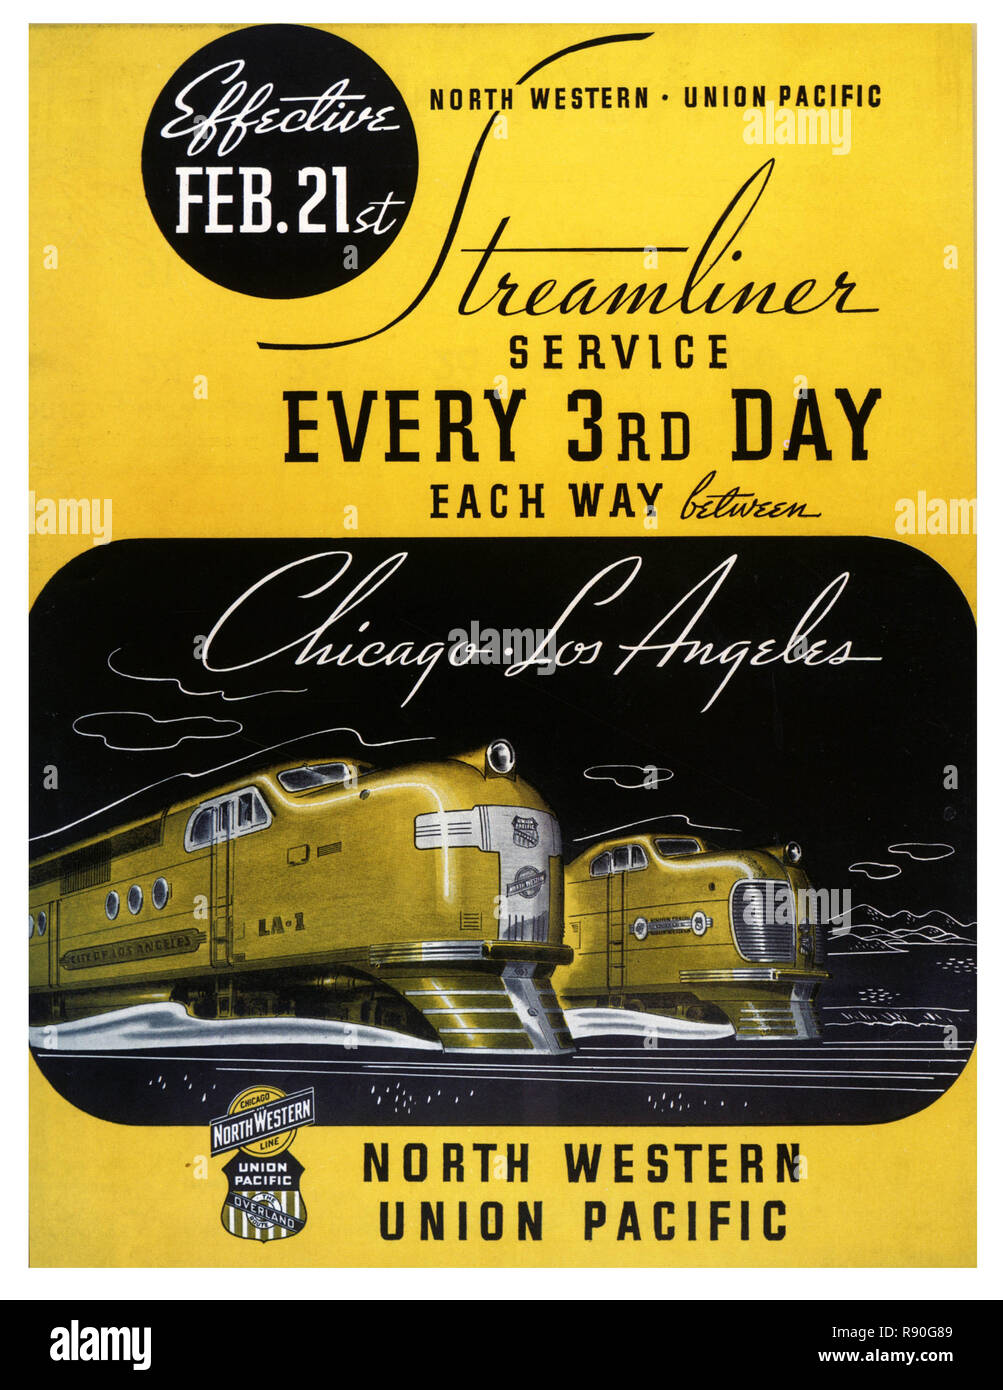 Streamliner Service Every Third Day - Vintage U.S  advertising Poster Stock Photo